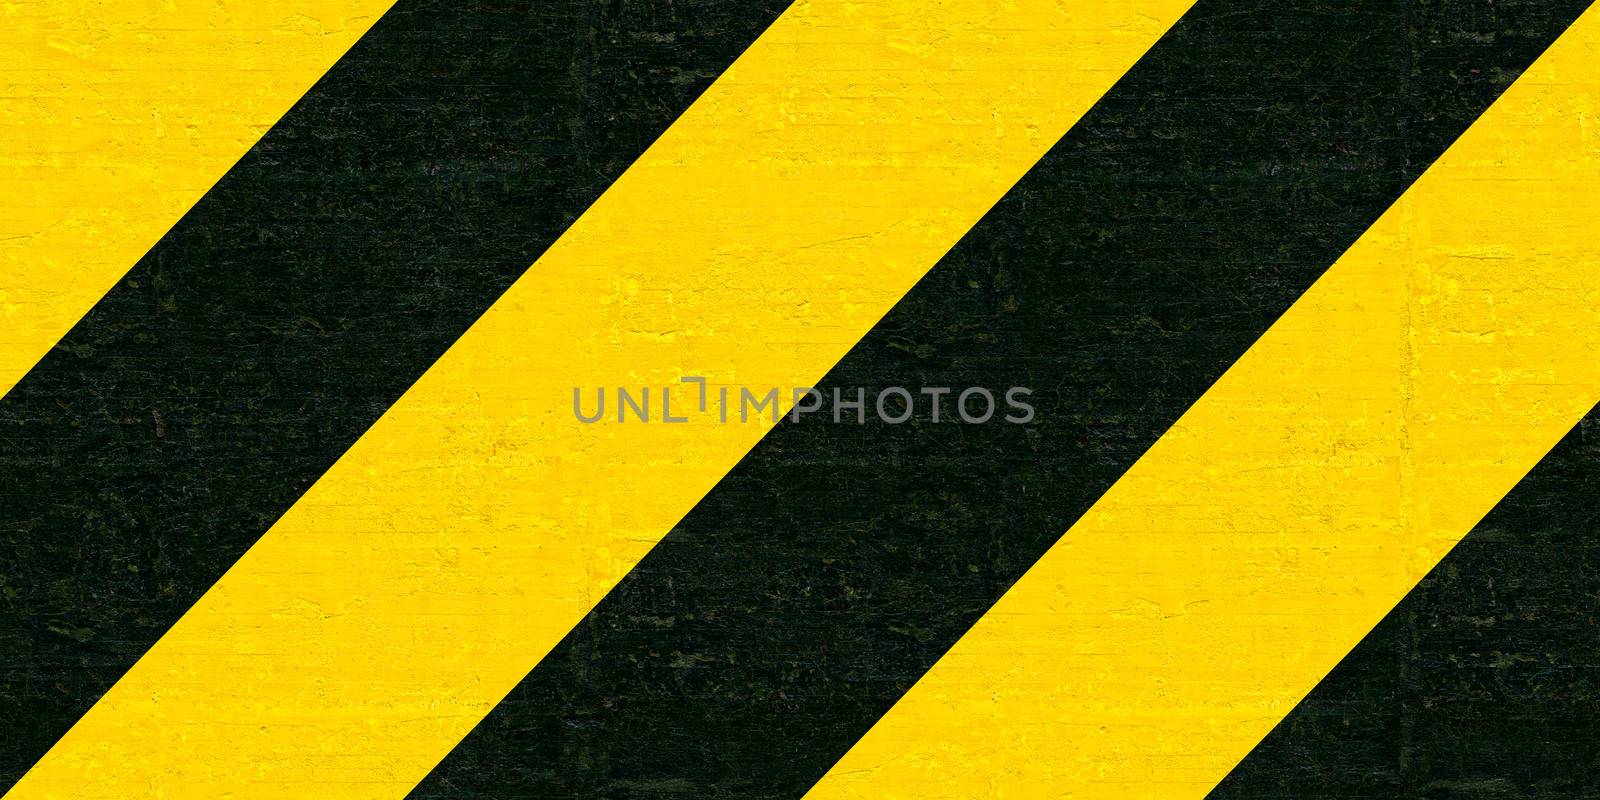 Warning black and yellow hazard stripes texture. Construction sign